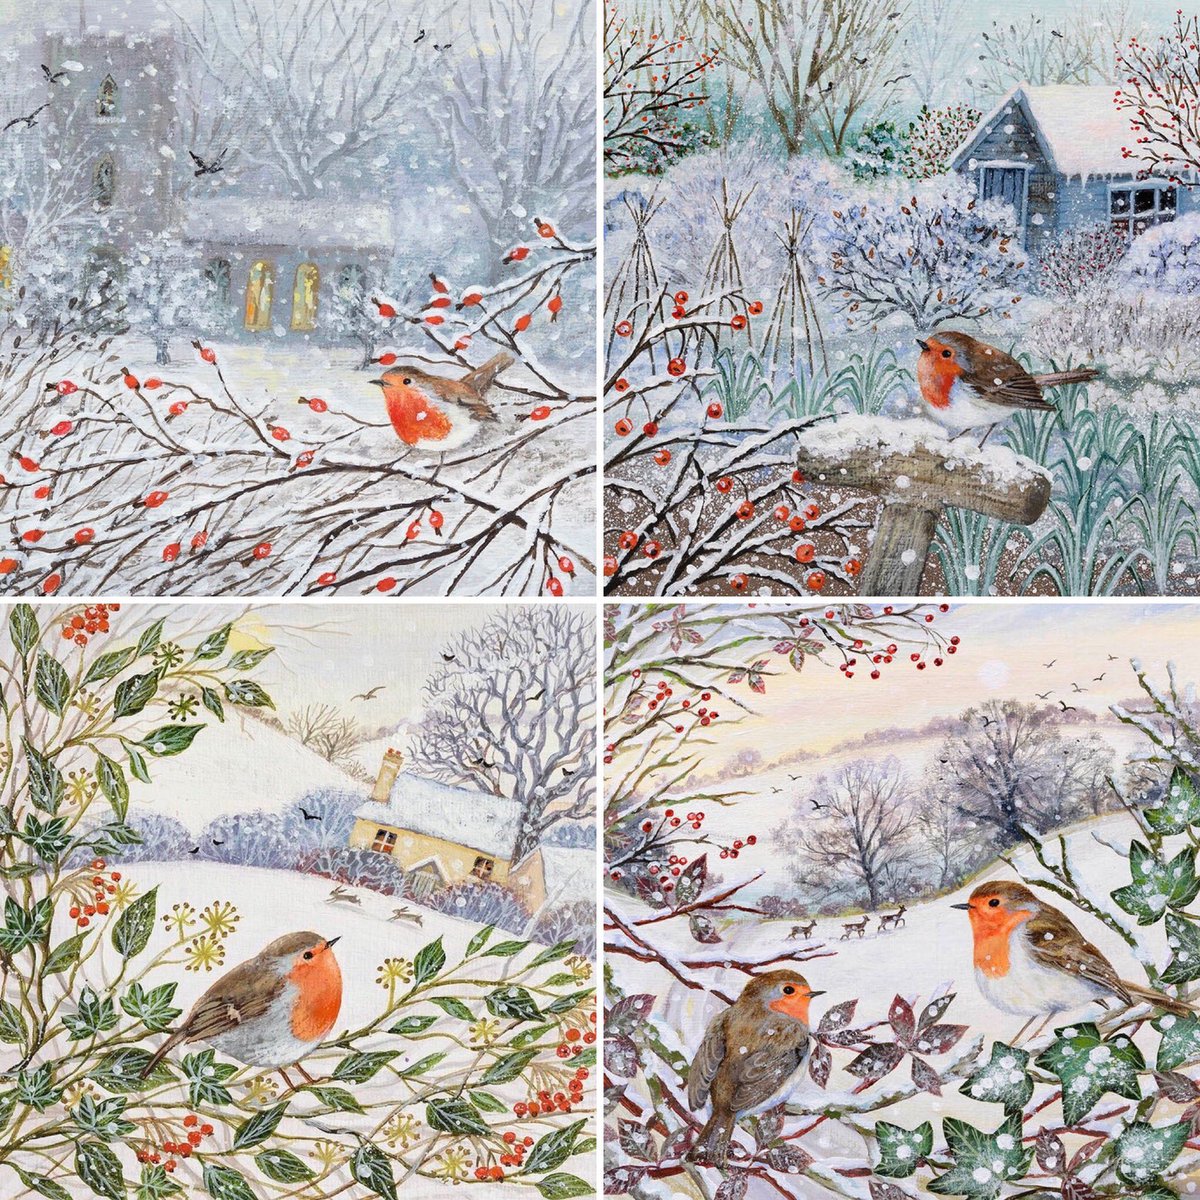 Everybody’s favourite bird has its own special day! 21st December is #NationalRobinDay #robin #LegendaryWednesday #FolkloreThursday #WinterSolstice